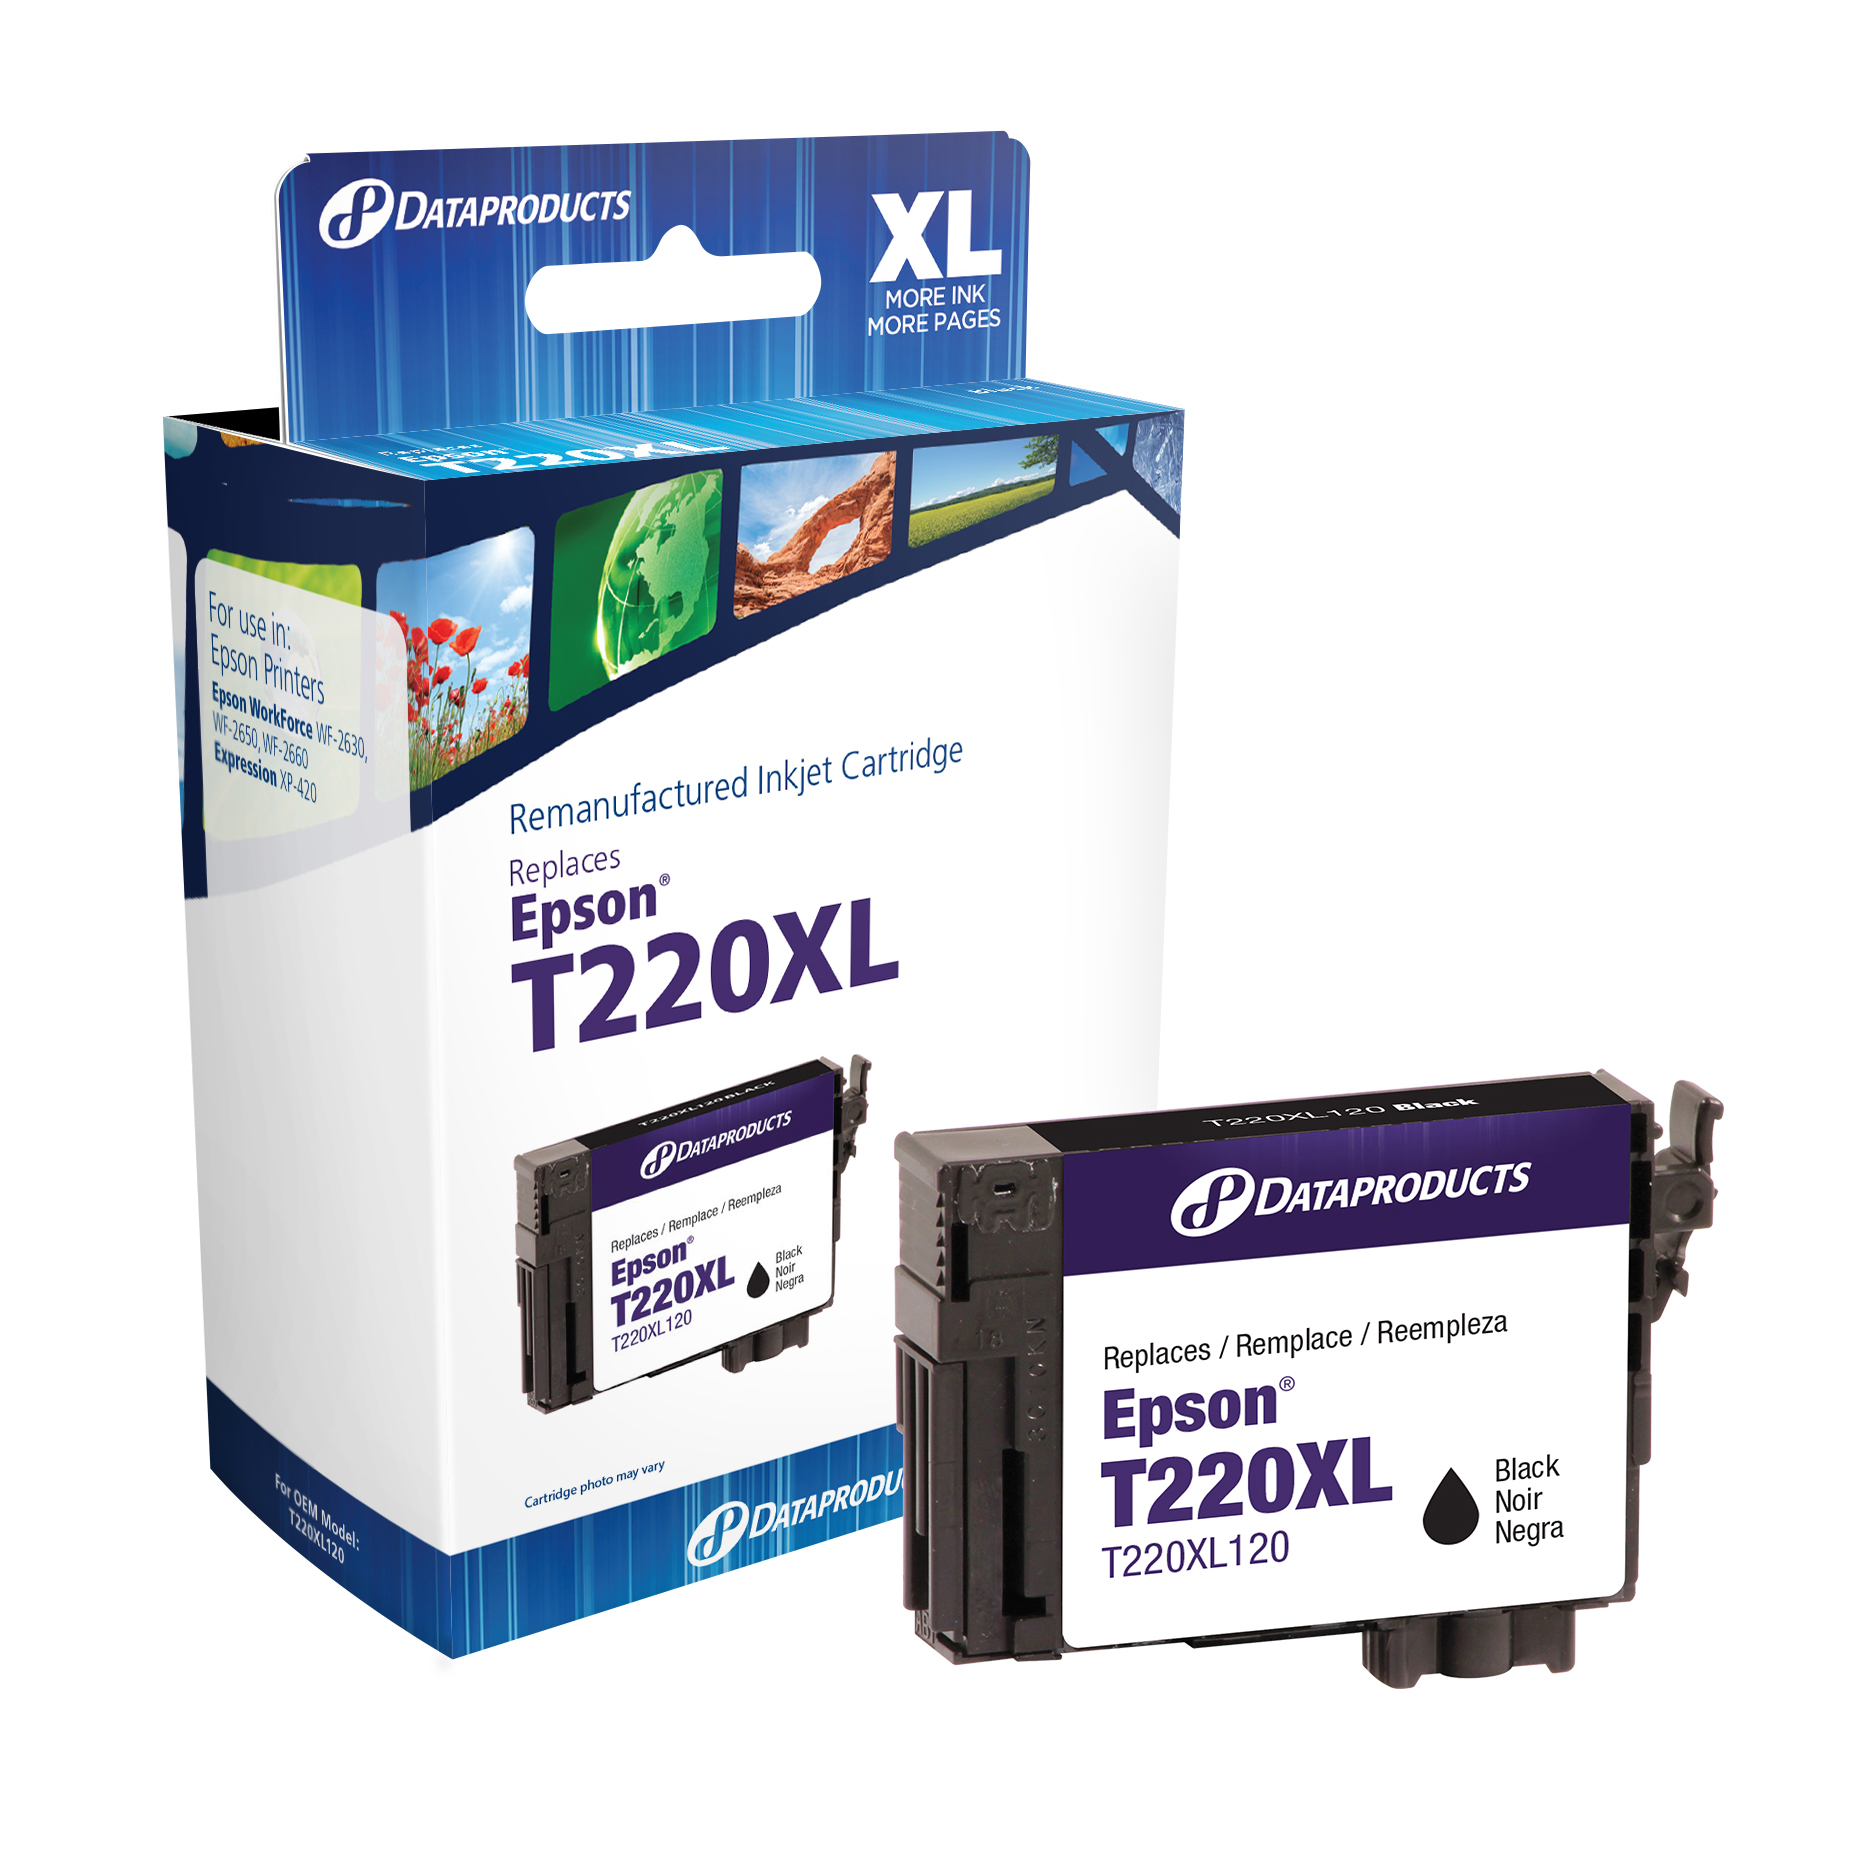 Dataproducts DPC220XL120 Remanufactured Inkjet Cartridge for Epson T220XL - High Capacity Black Ink